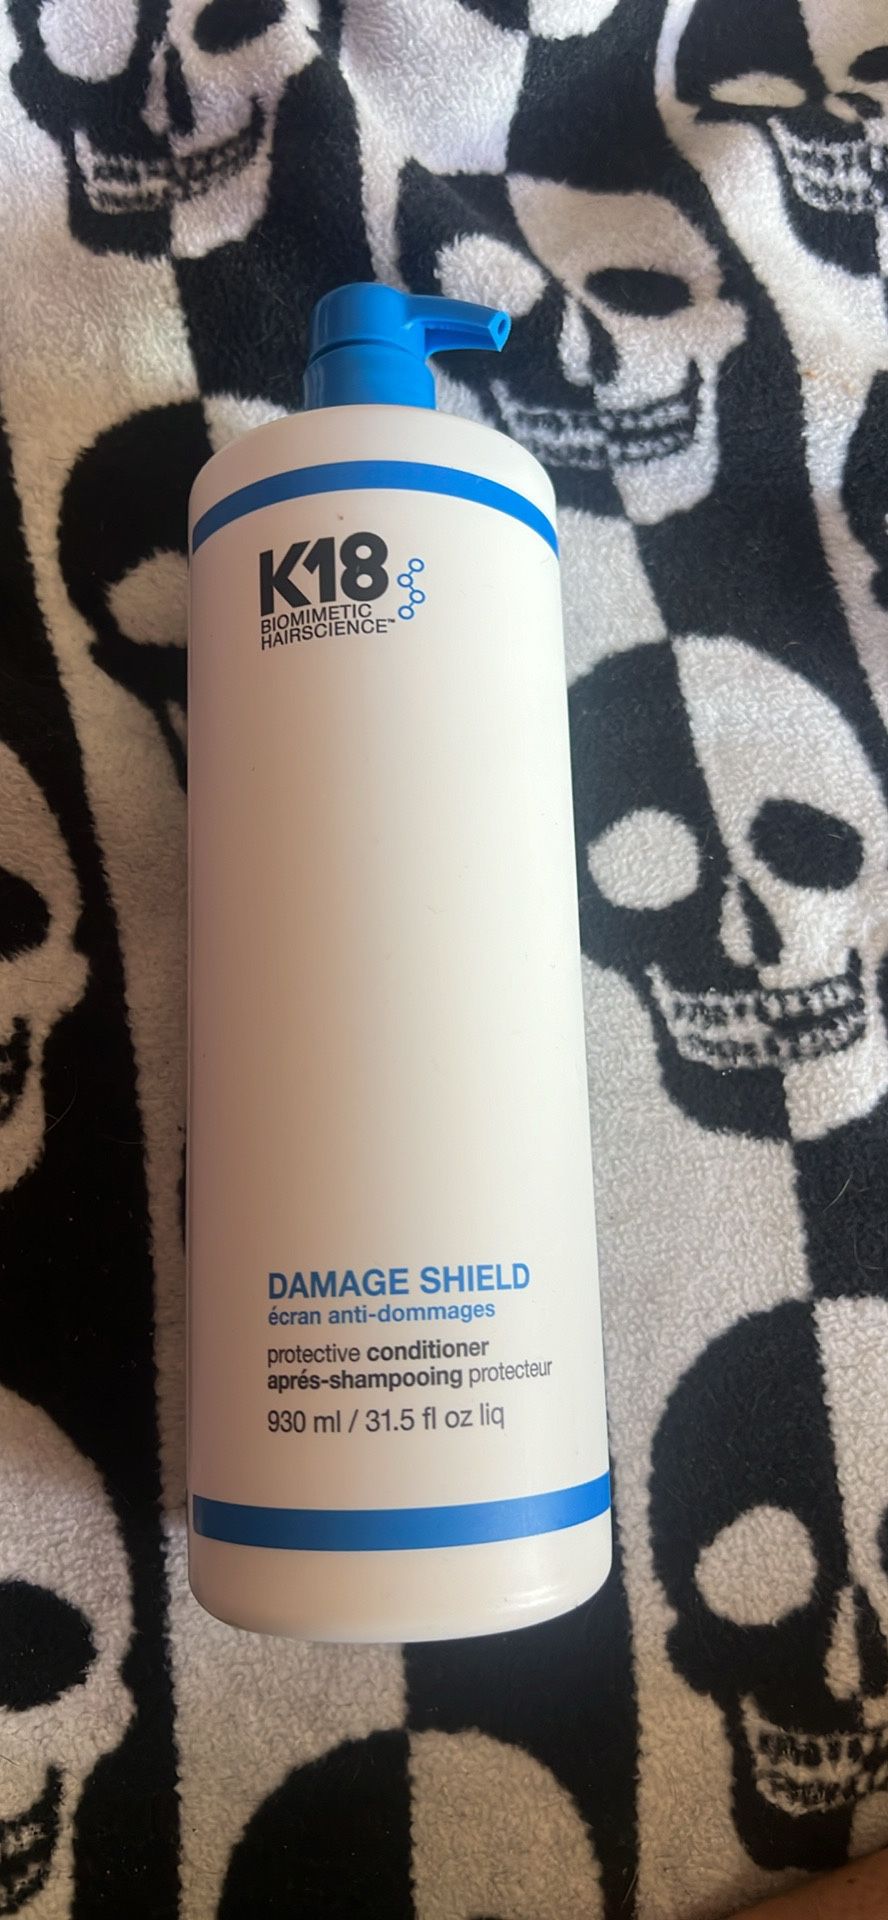 K 18 damage shield protective conditioner (professional size 1 liter) with pump ..  